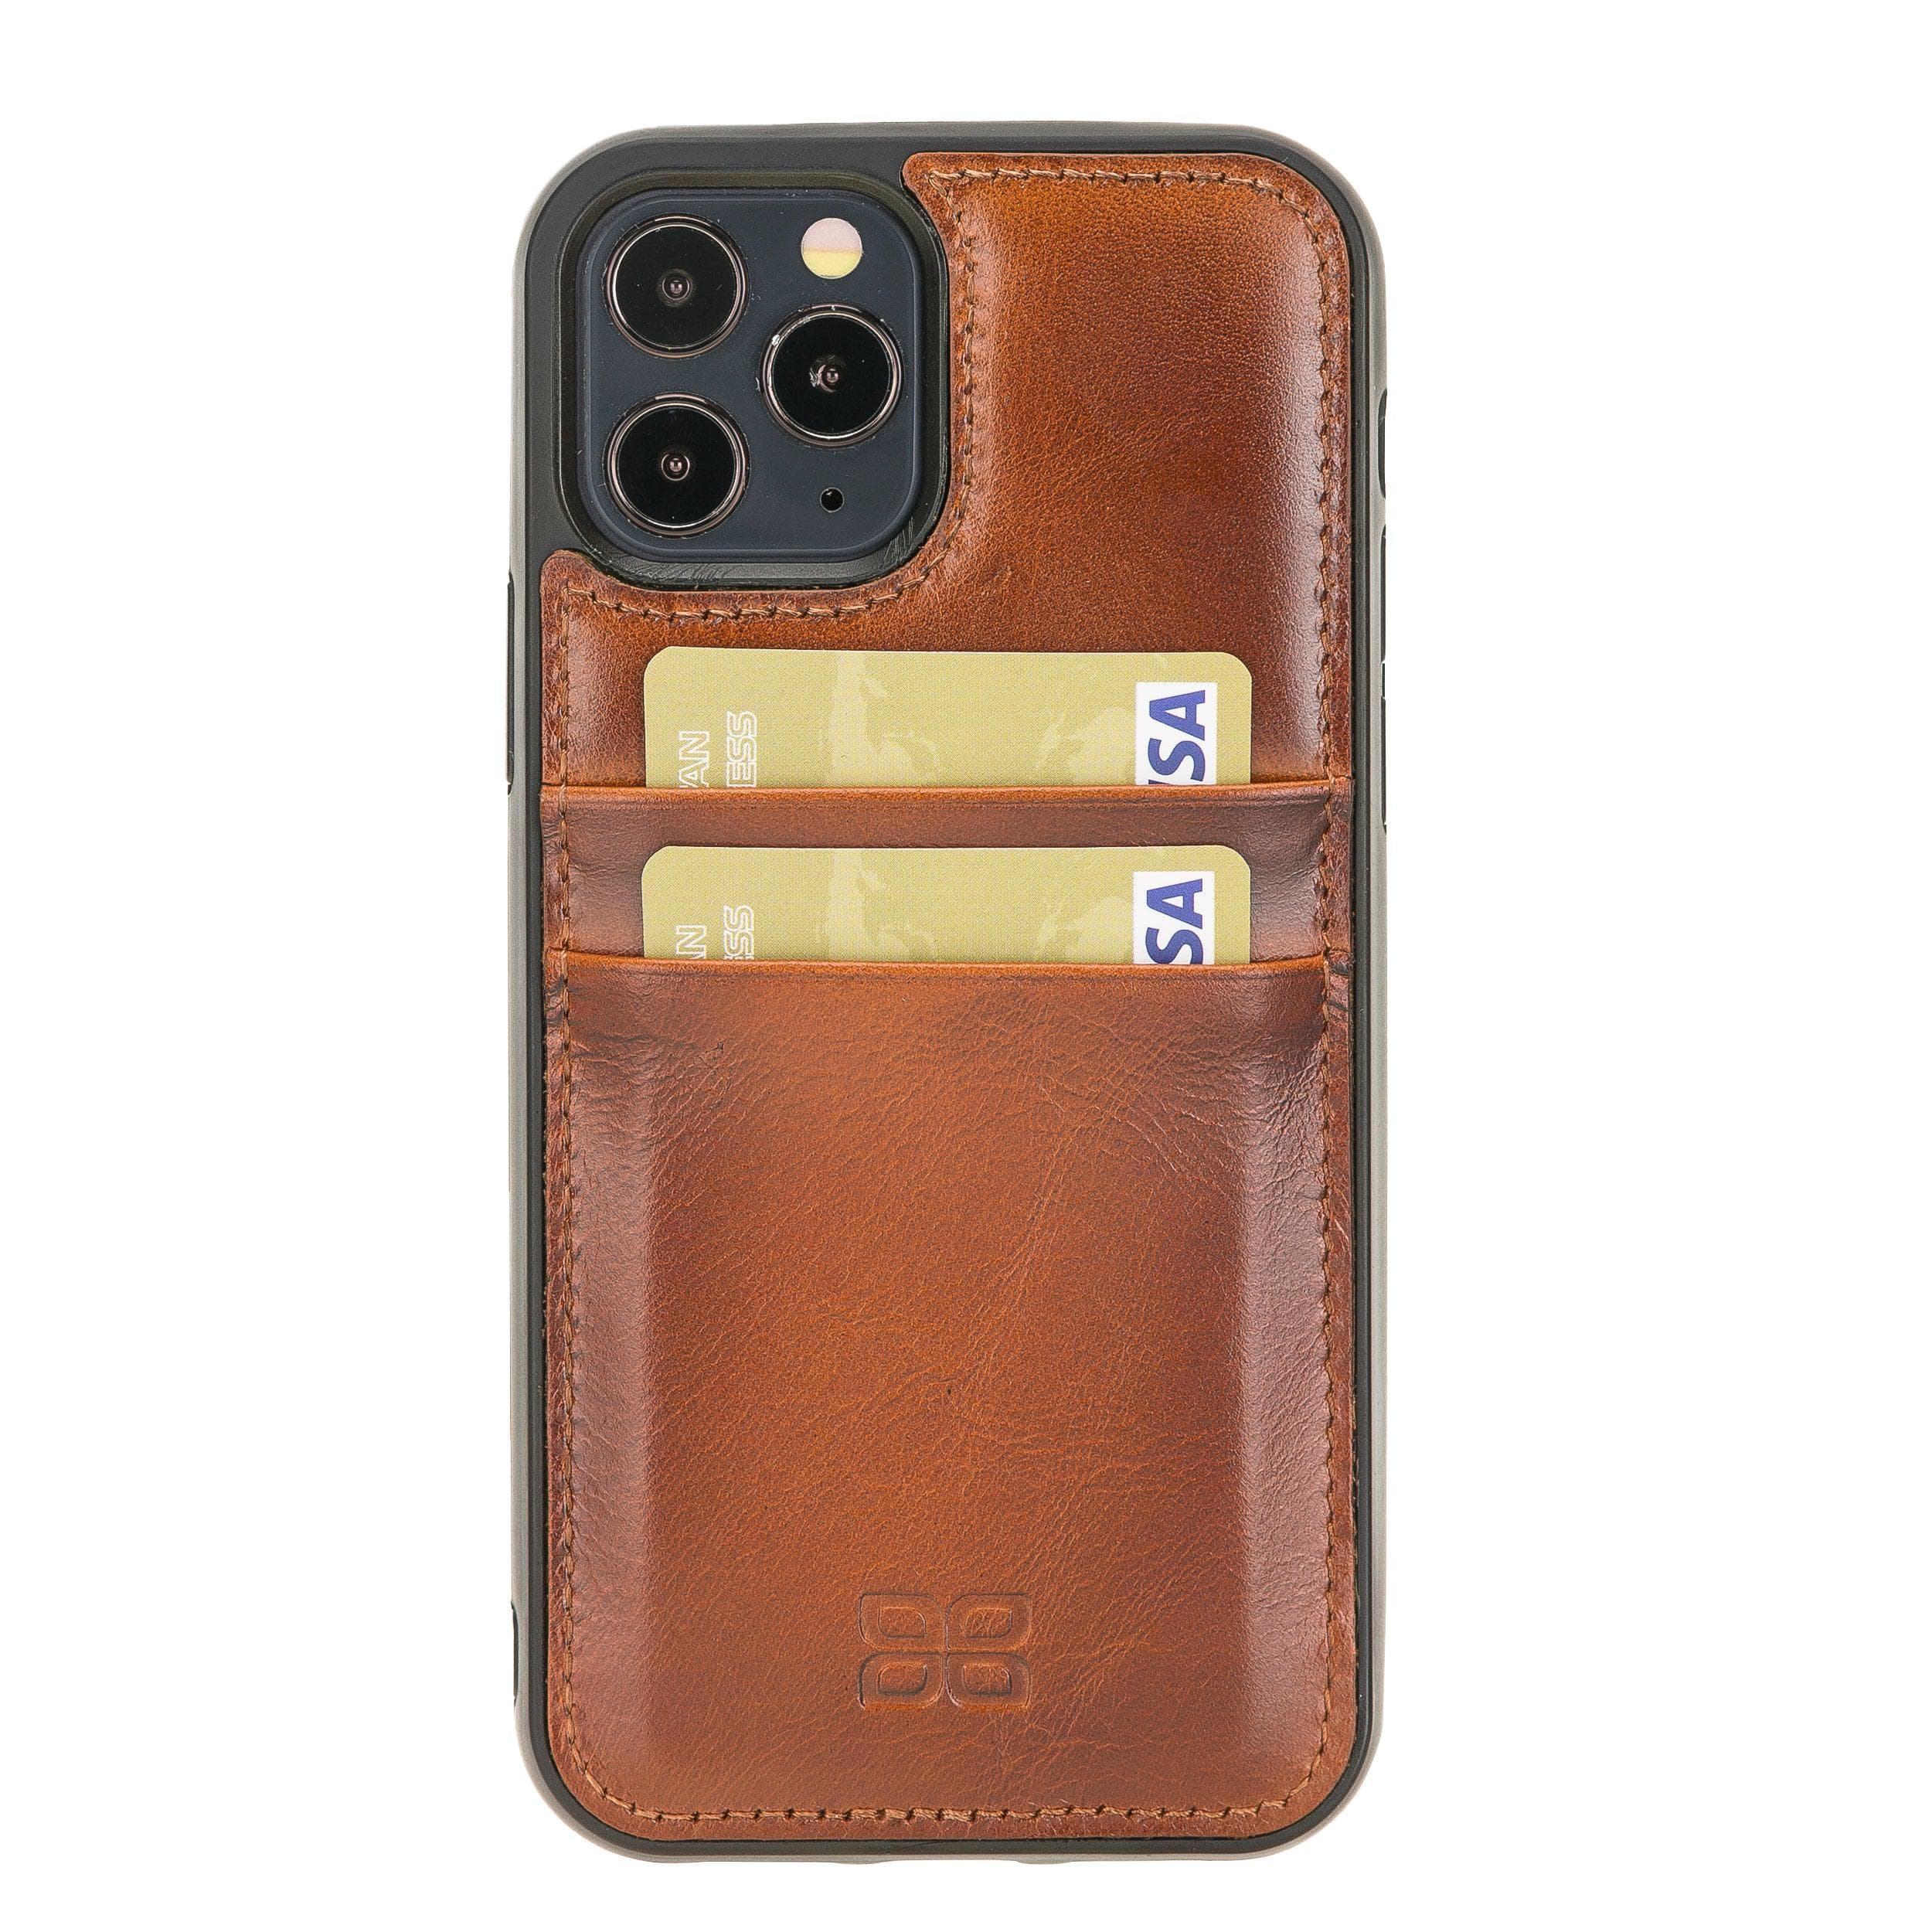 Flexible Leather Back Cover with Card Holder for iPhone 12 Series iPhone 12 Pro / Tan Bouletta LTD